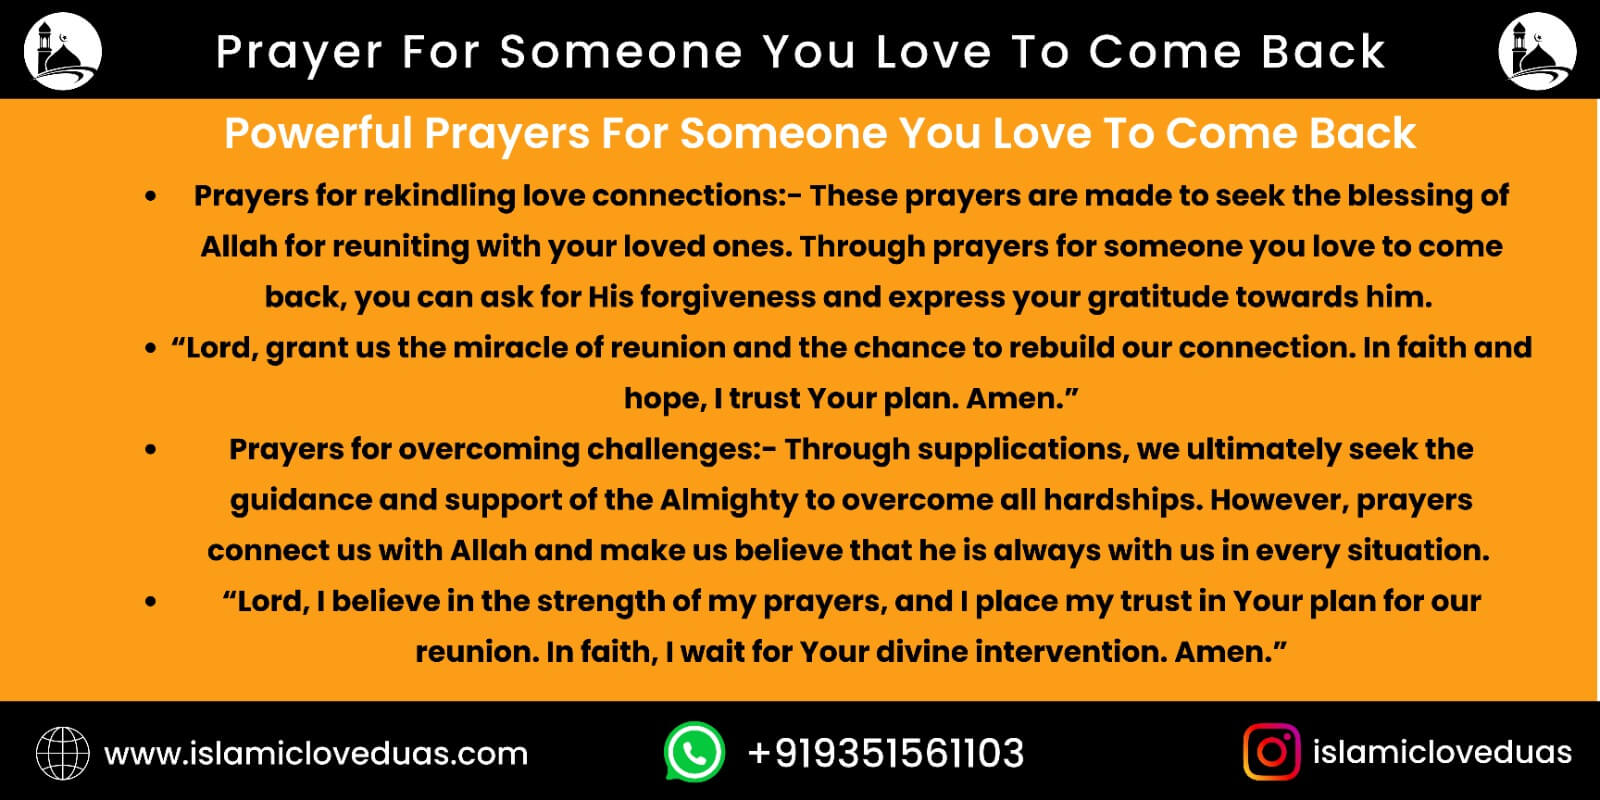 Prayer For Someone You Love To Come Back